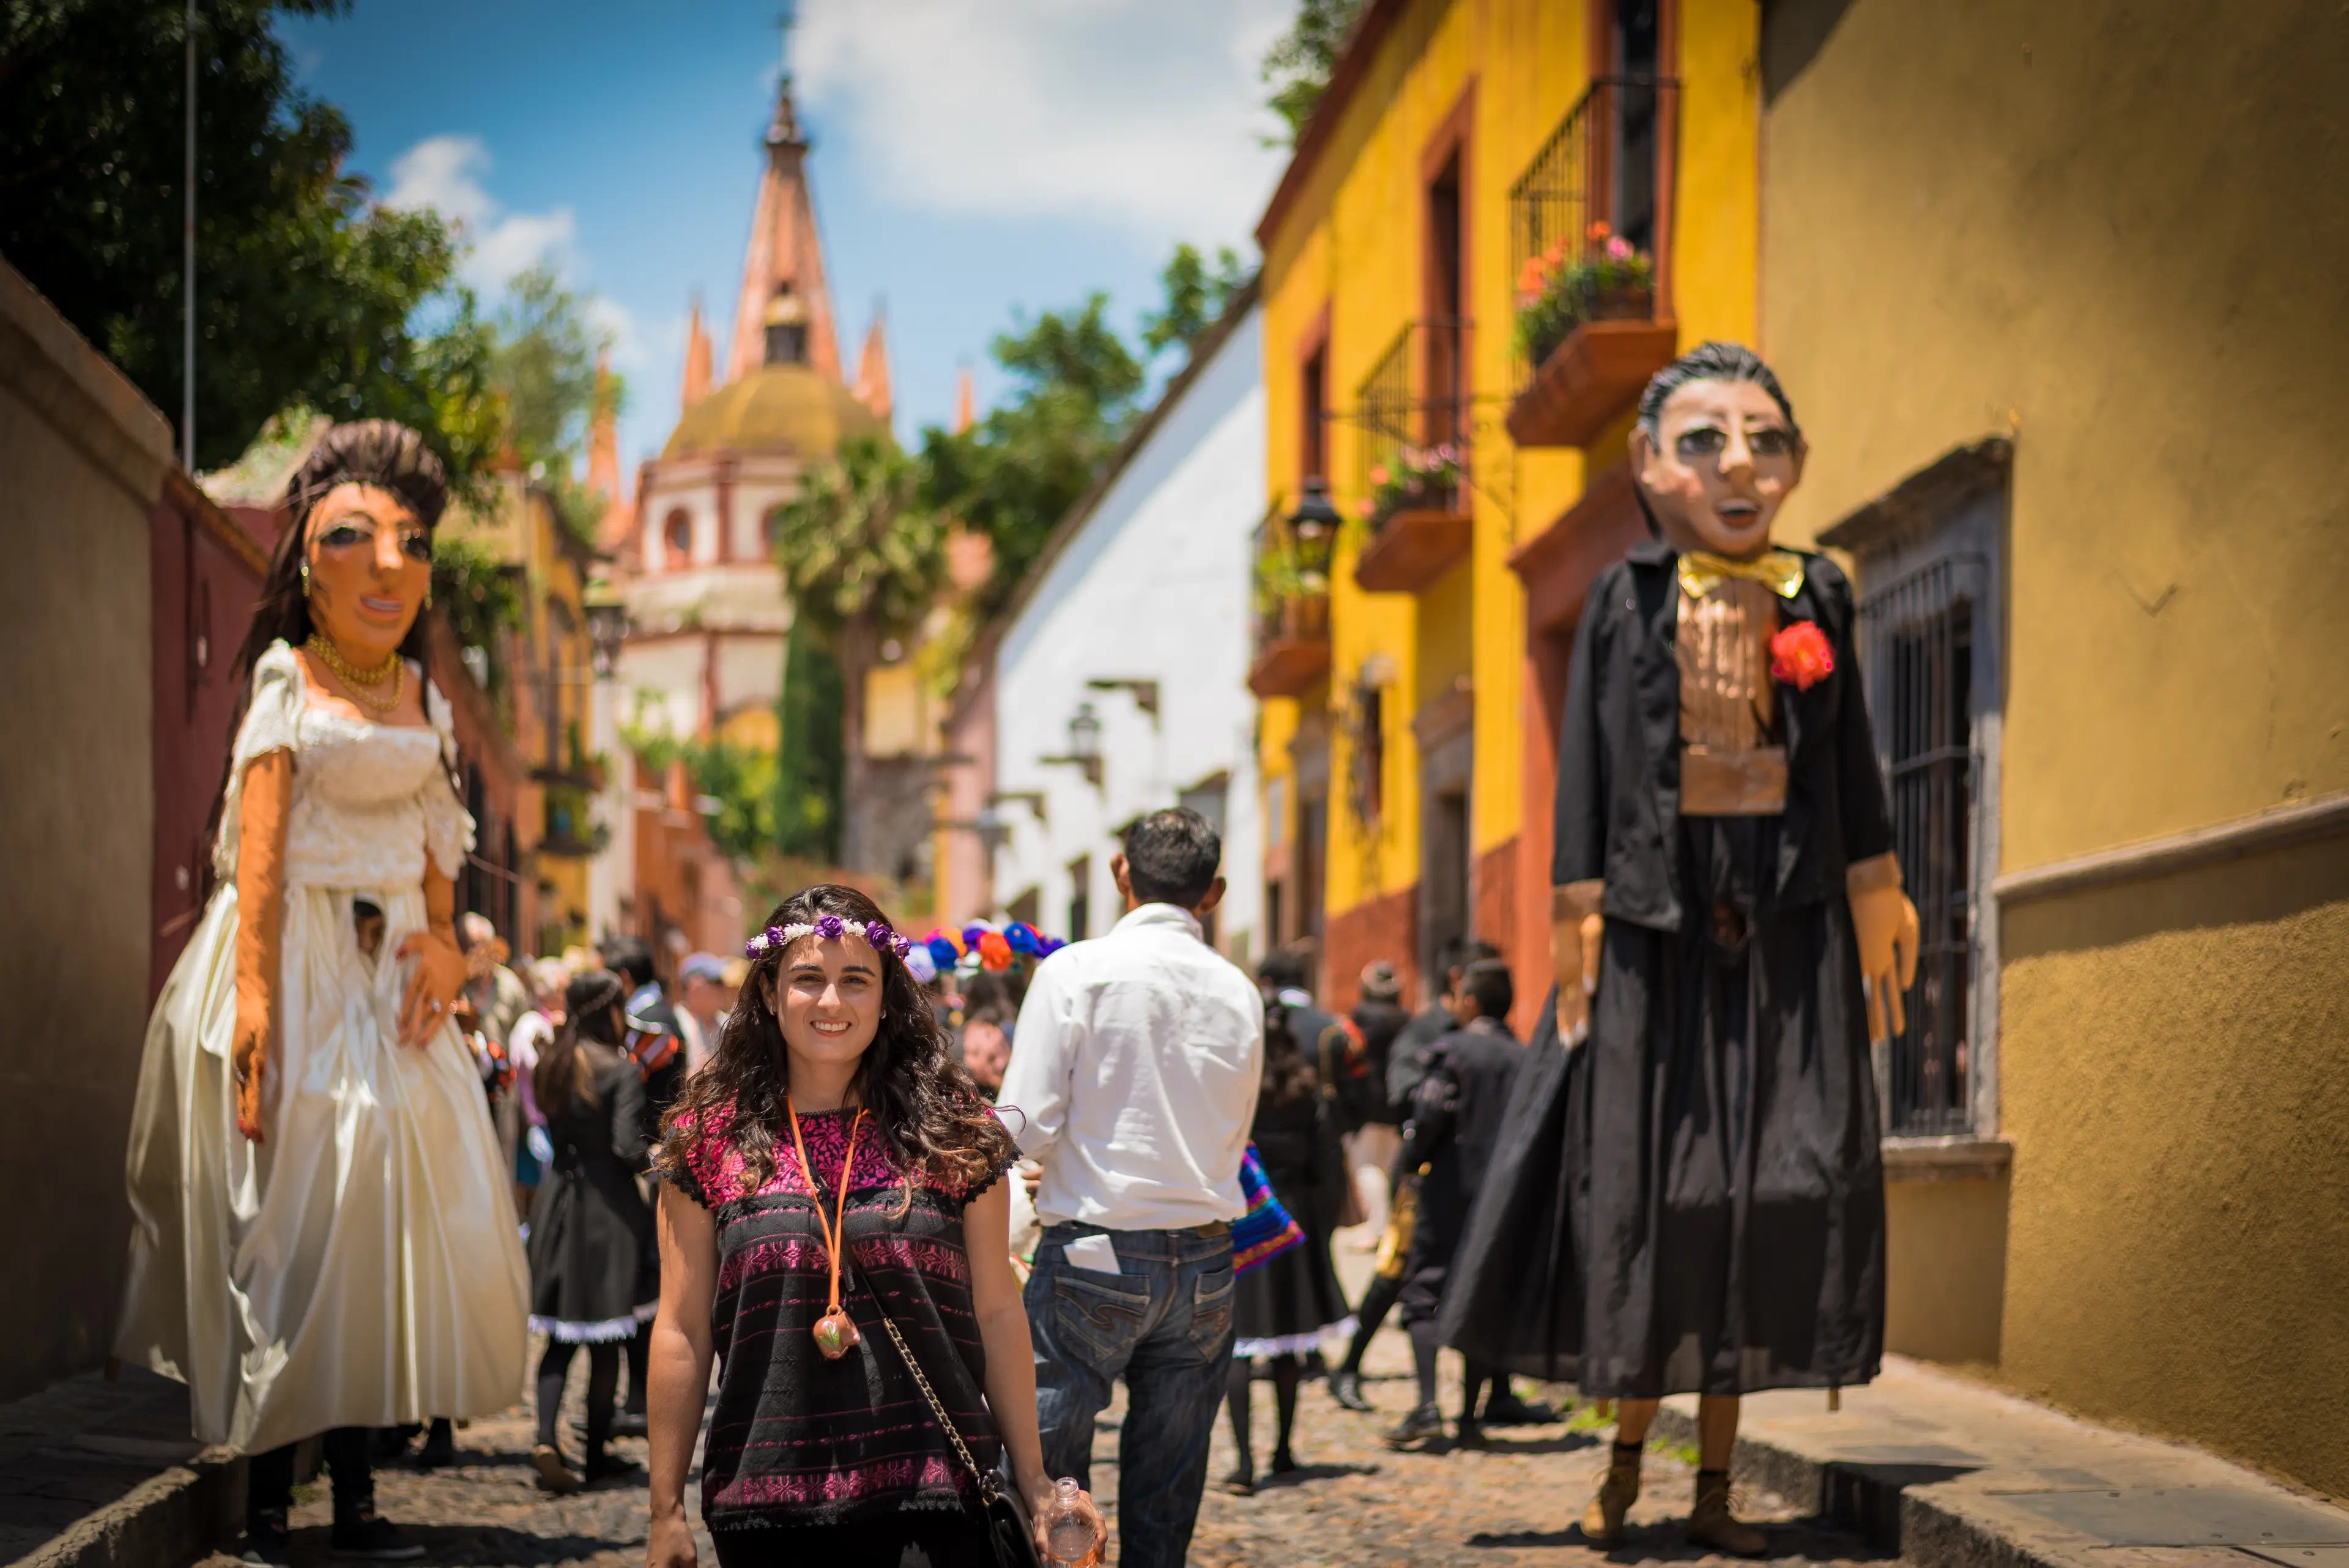 1-Day Family Adventure in San Miguel de Allende: Sightseeing & Shopping